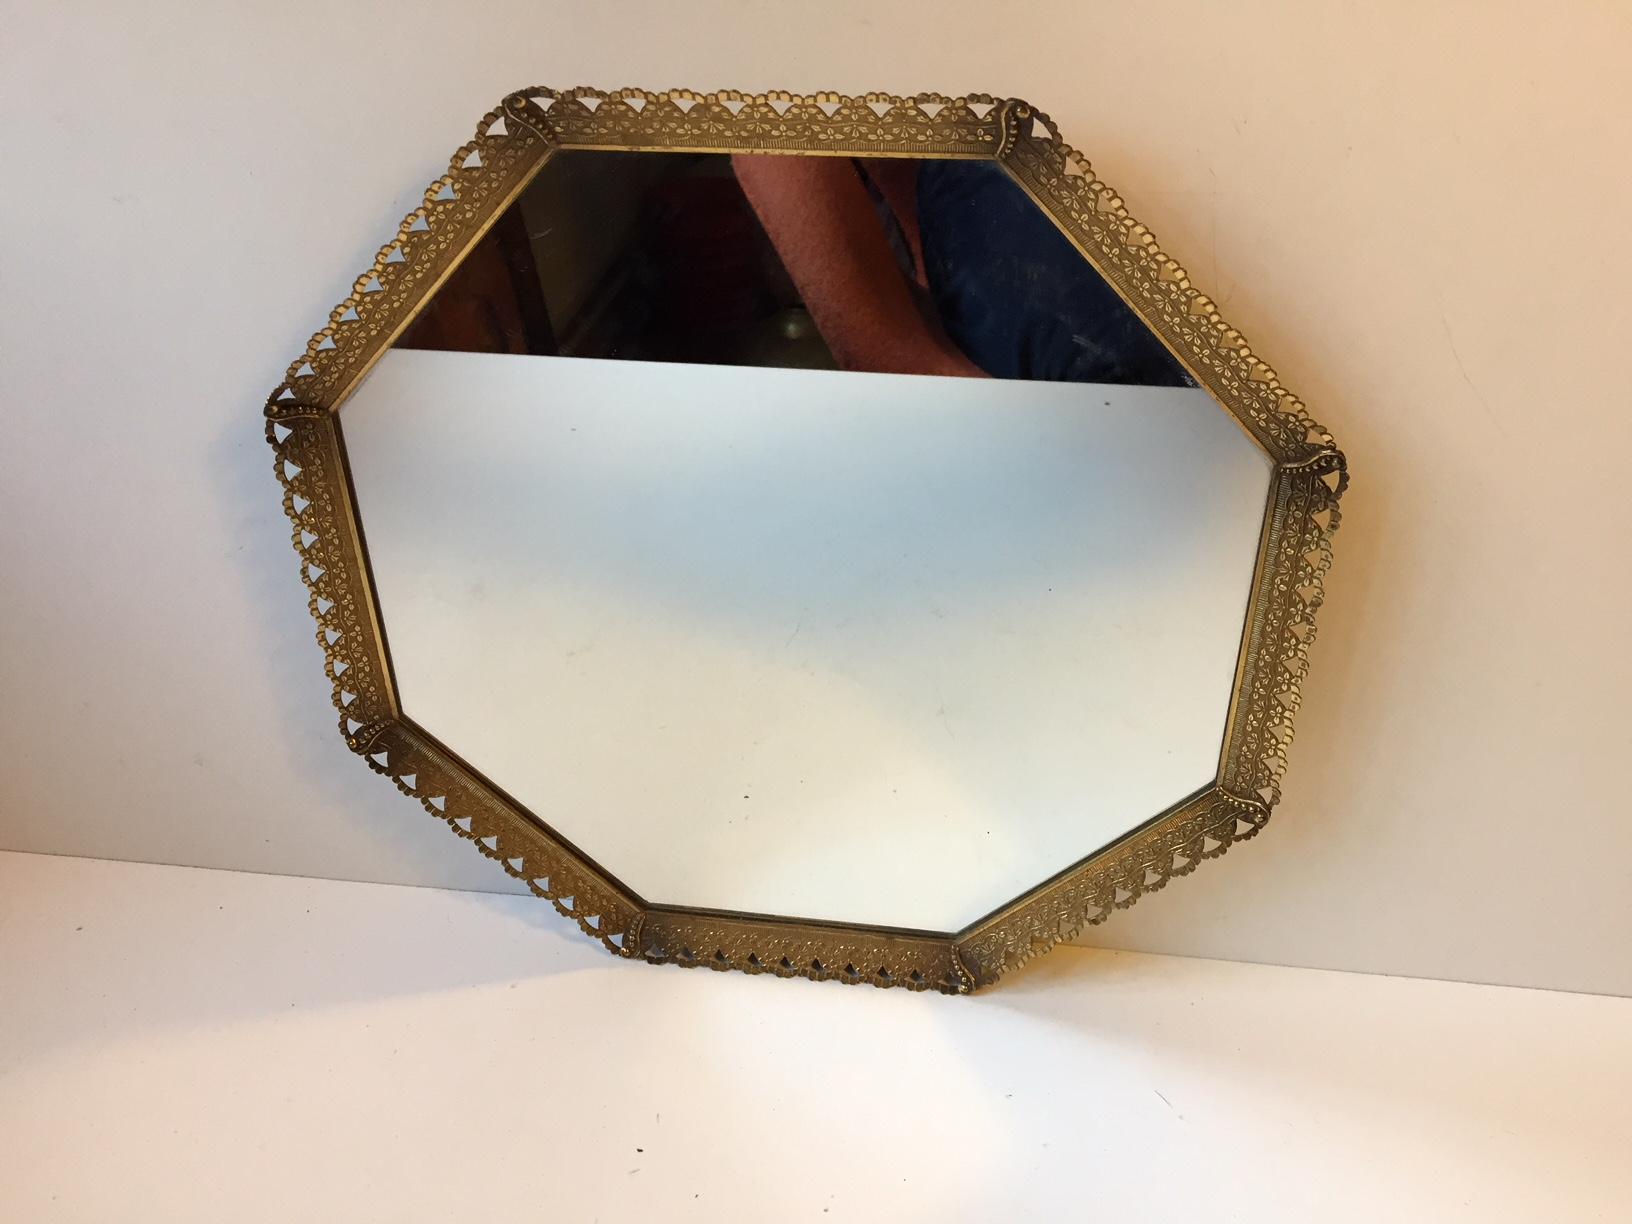 Wall-mounted or free standing octagonal vanity mirror. It features a partially pierced and ornamented brass frame. The mirror was manufactured in Denmark during the 1950s.